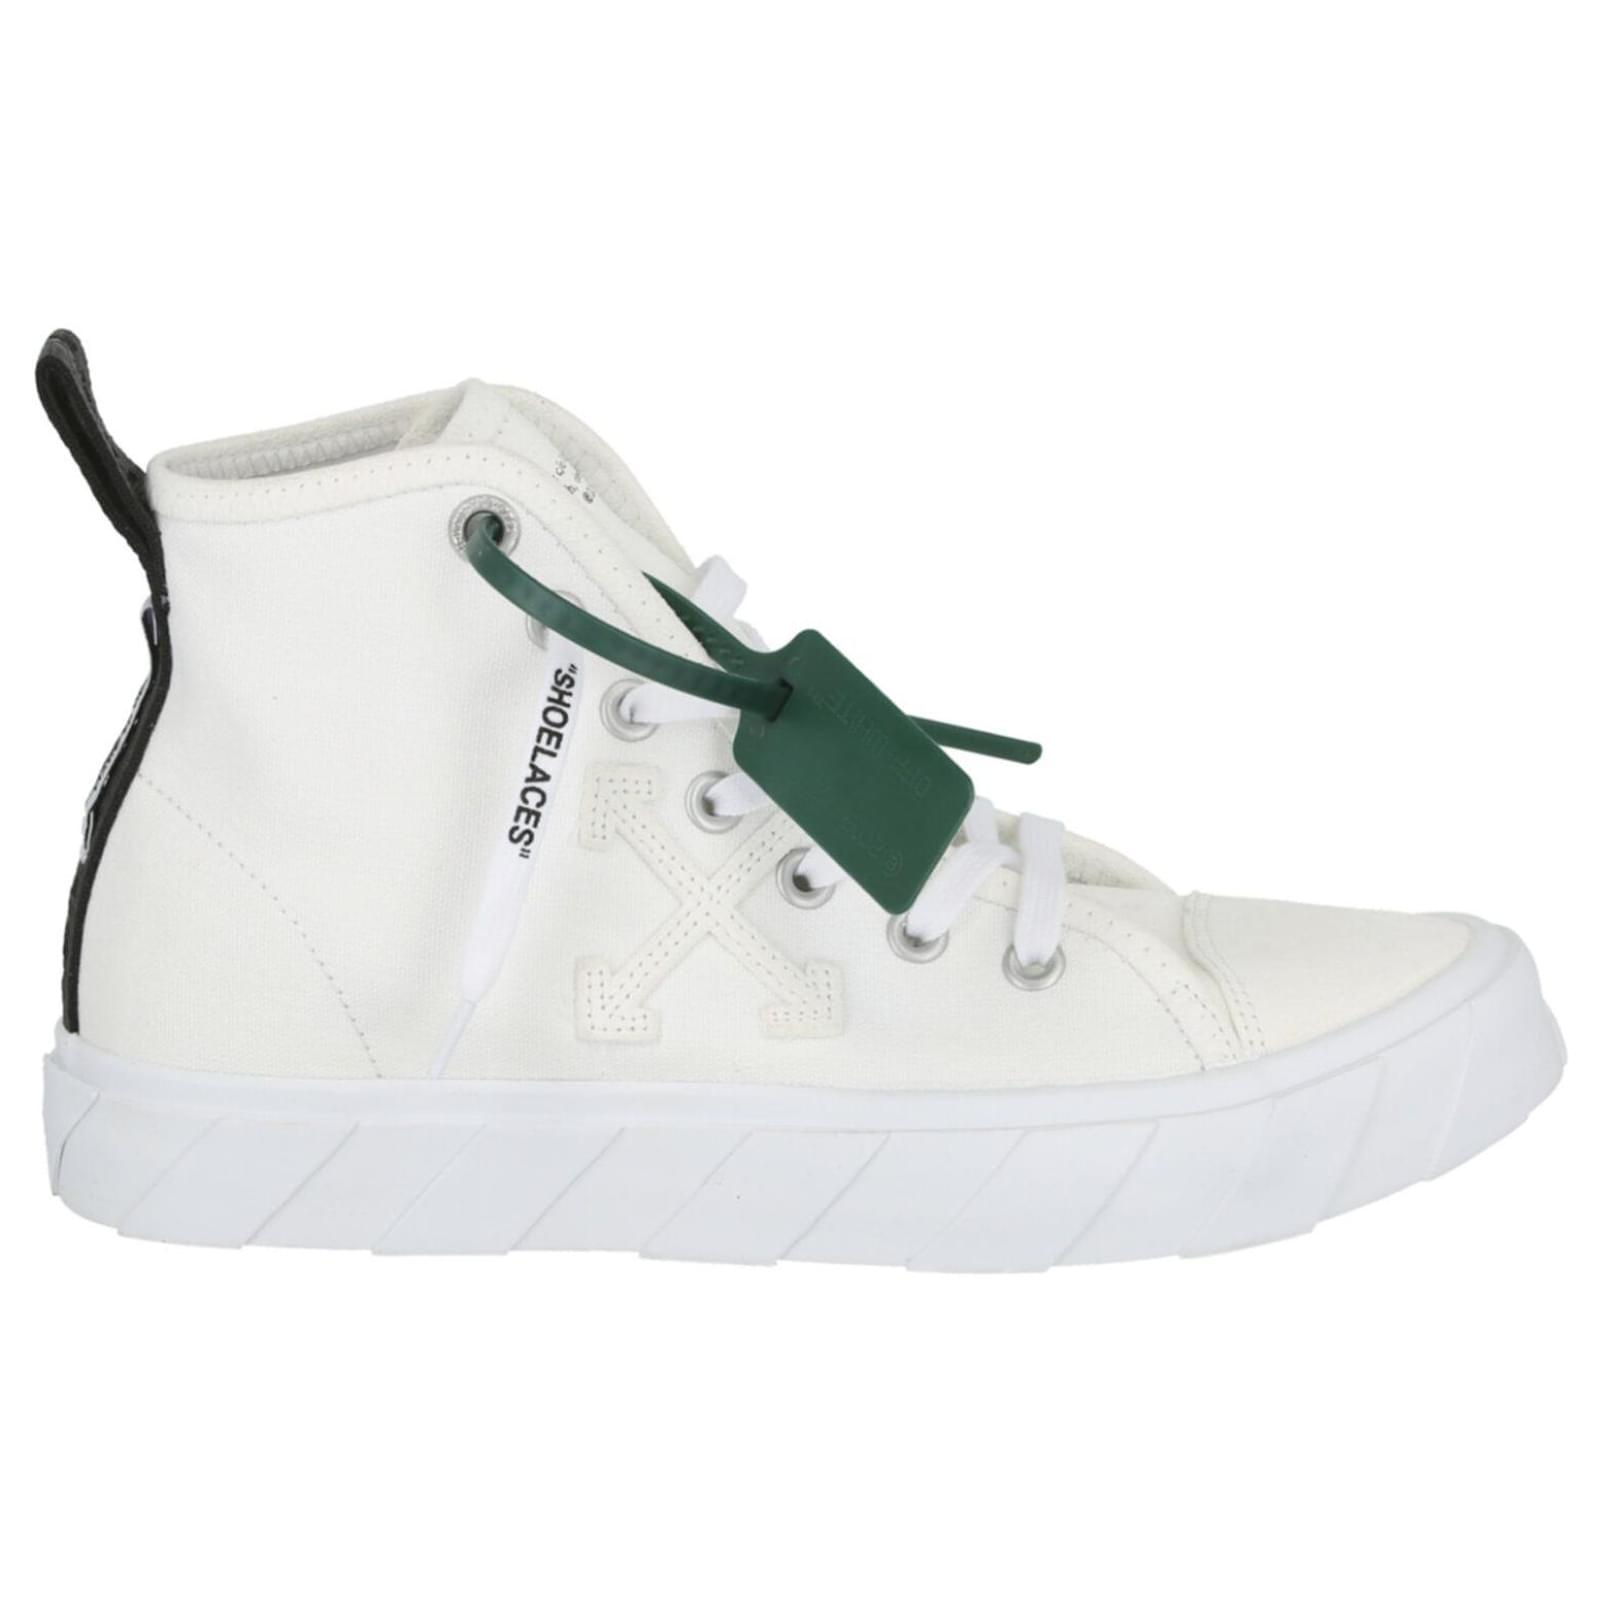 Off-White Vulcanized Canvas Mid-Top Sneakers